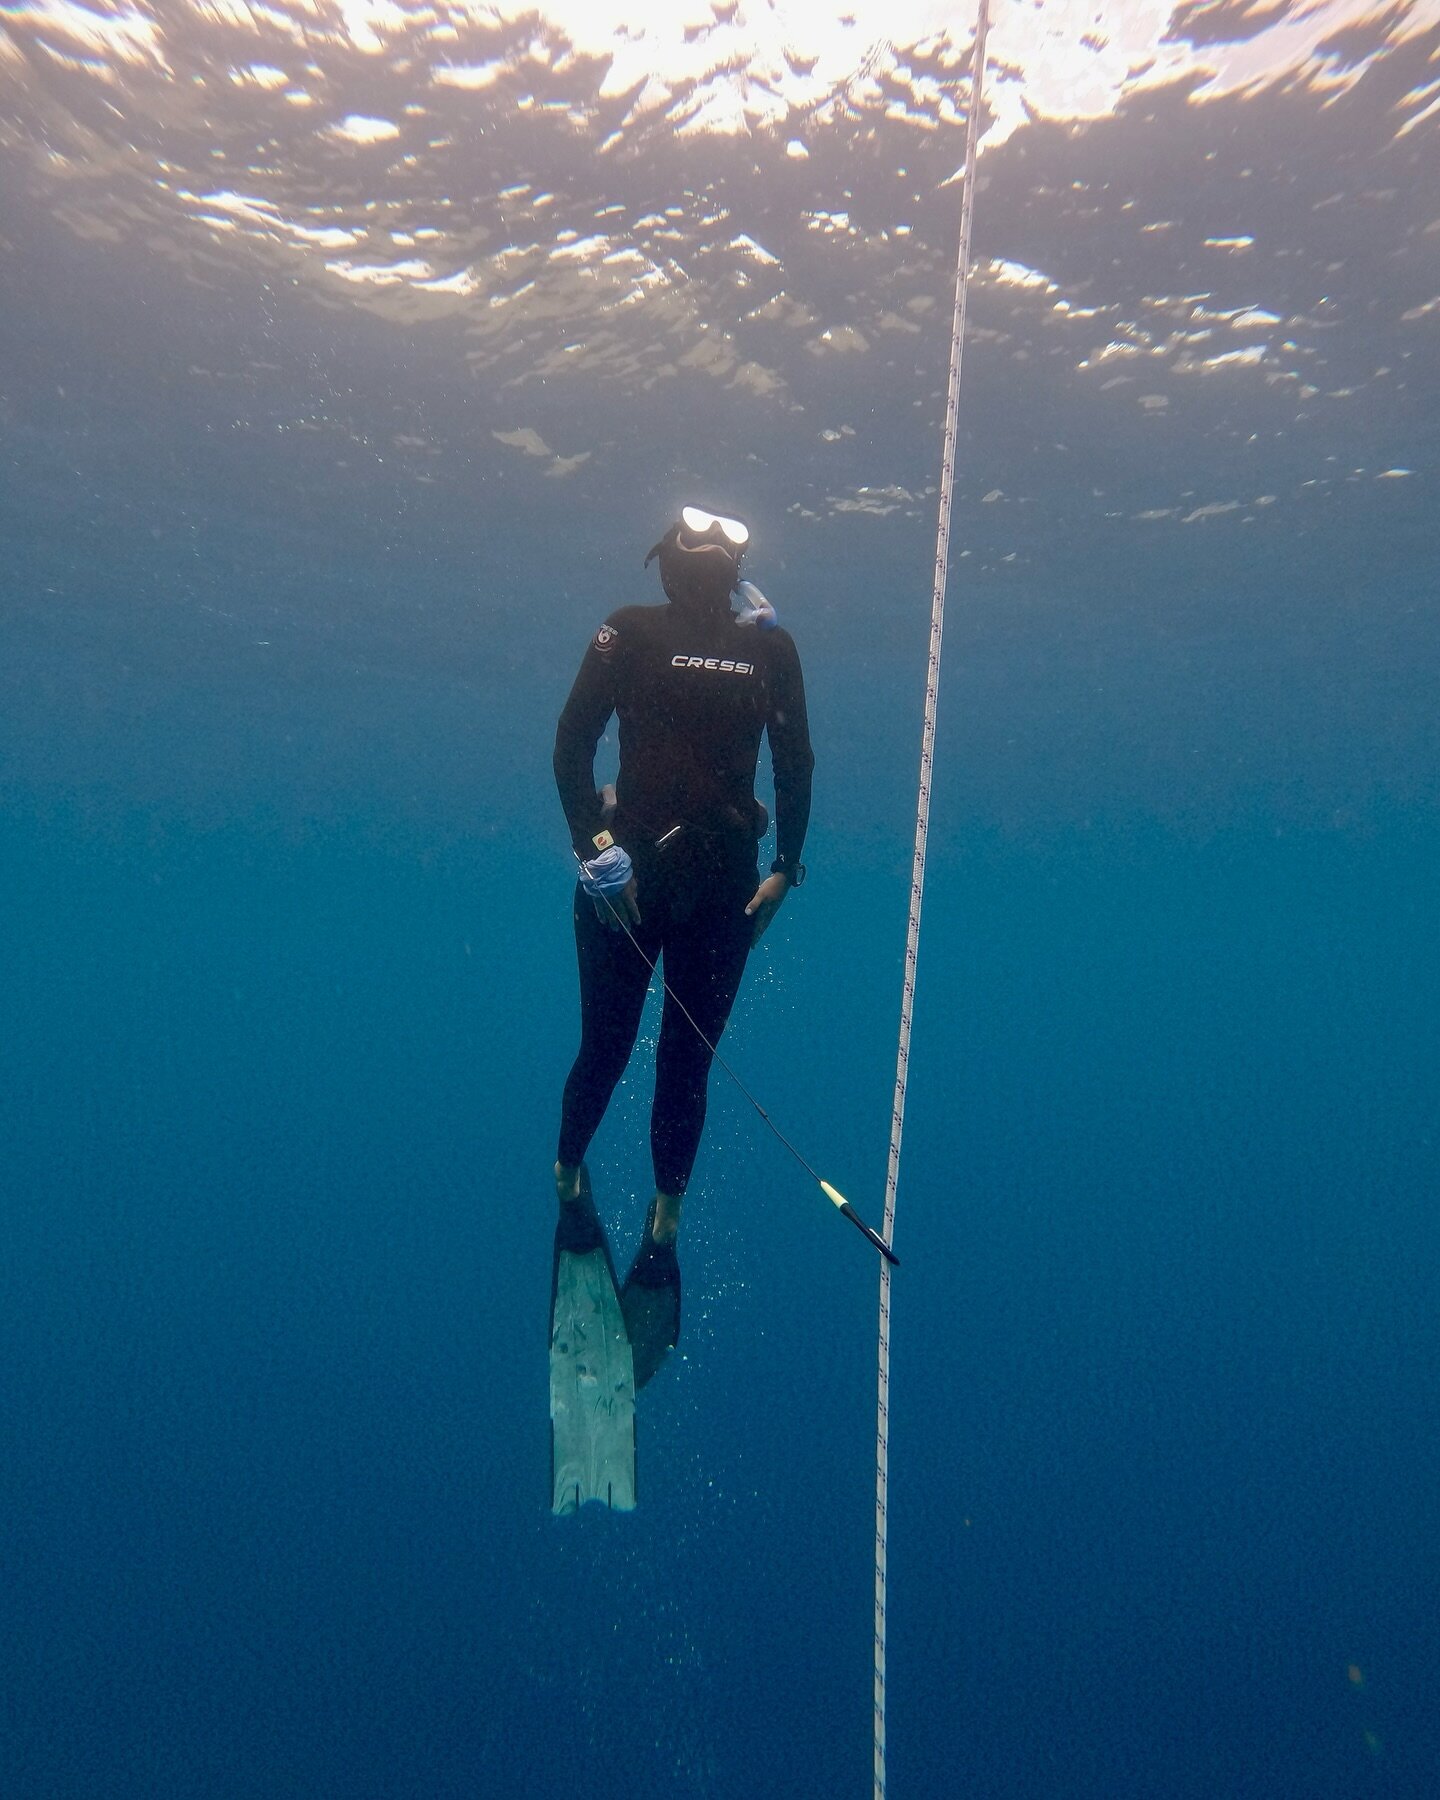 What are your goals for 2024?
Is diving deeper, holding your breath longer and being more relaxed in the ocean some of them? 
Then join us on @christmasisland and learn how to Freedive.

#freediving #ocean #holdyourbreath #divedeep #freedive #apnea #